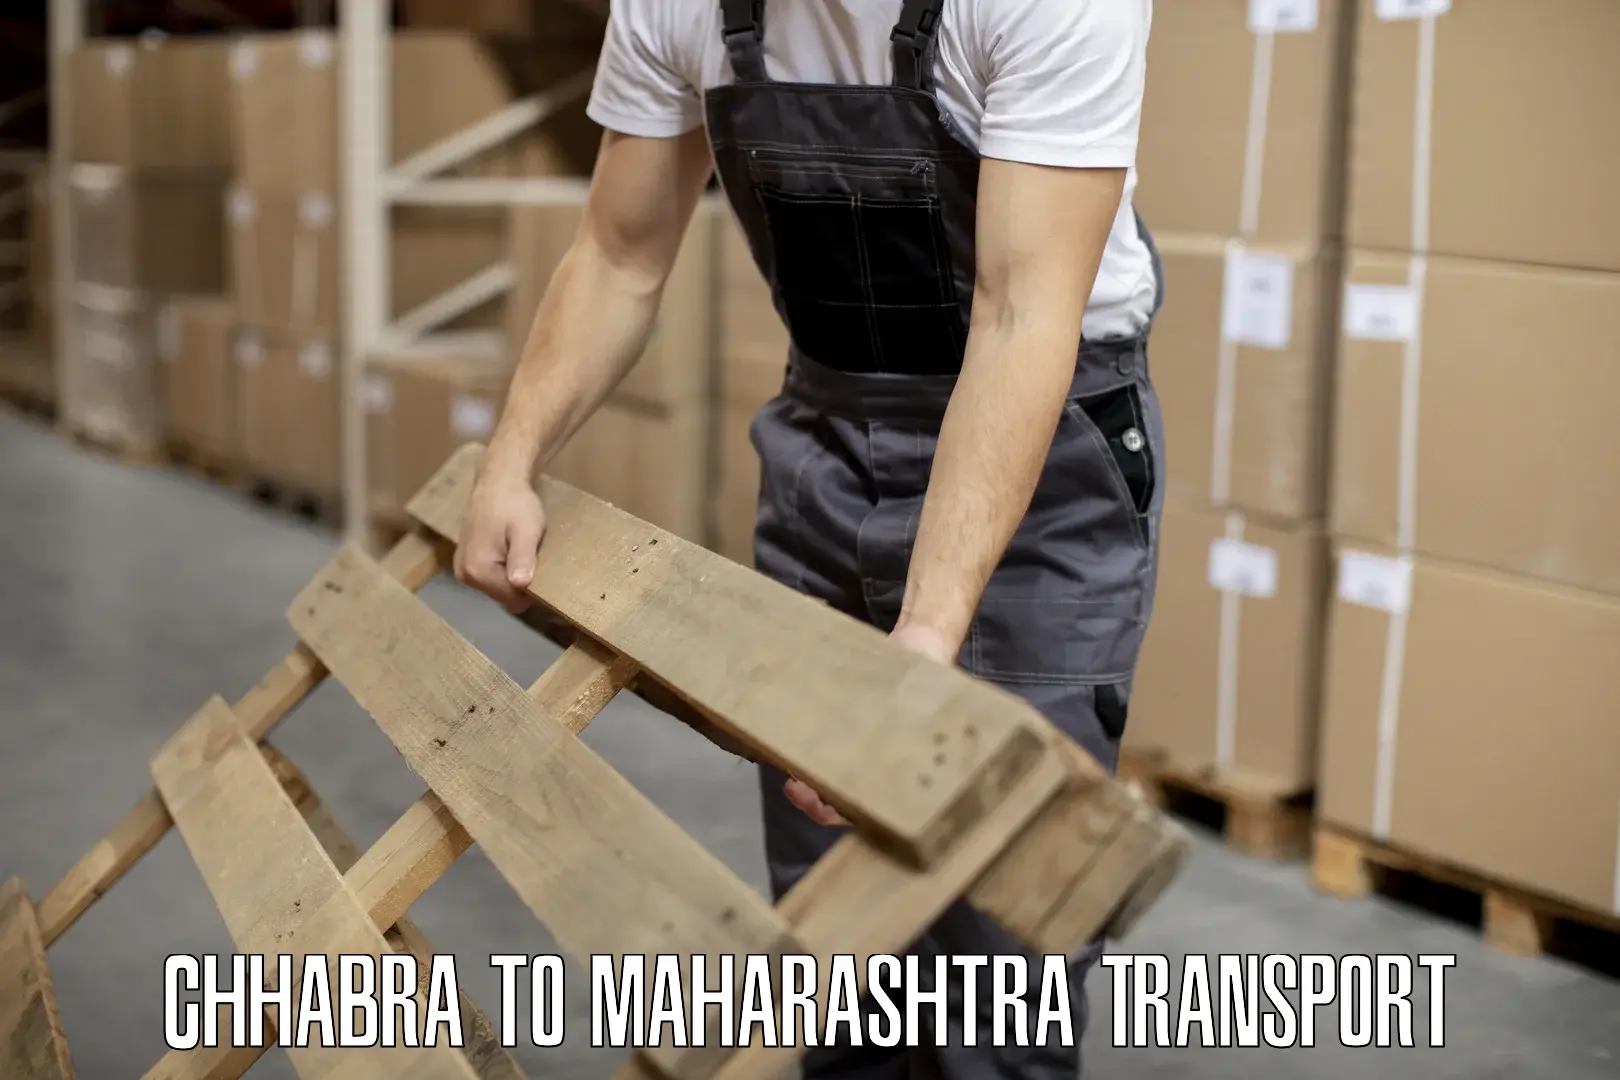 Truck transport companies in India Chhabra to Chandrapur